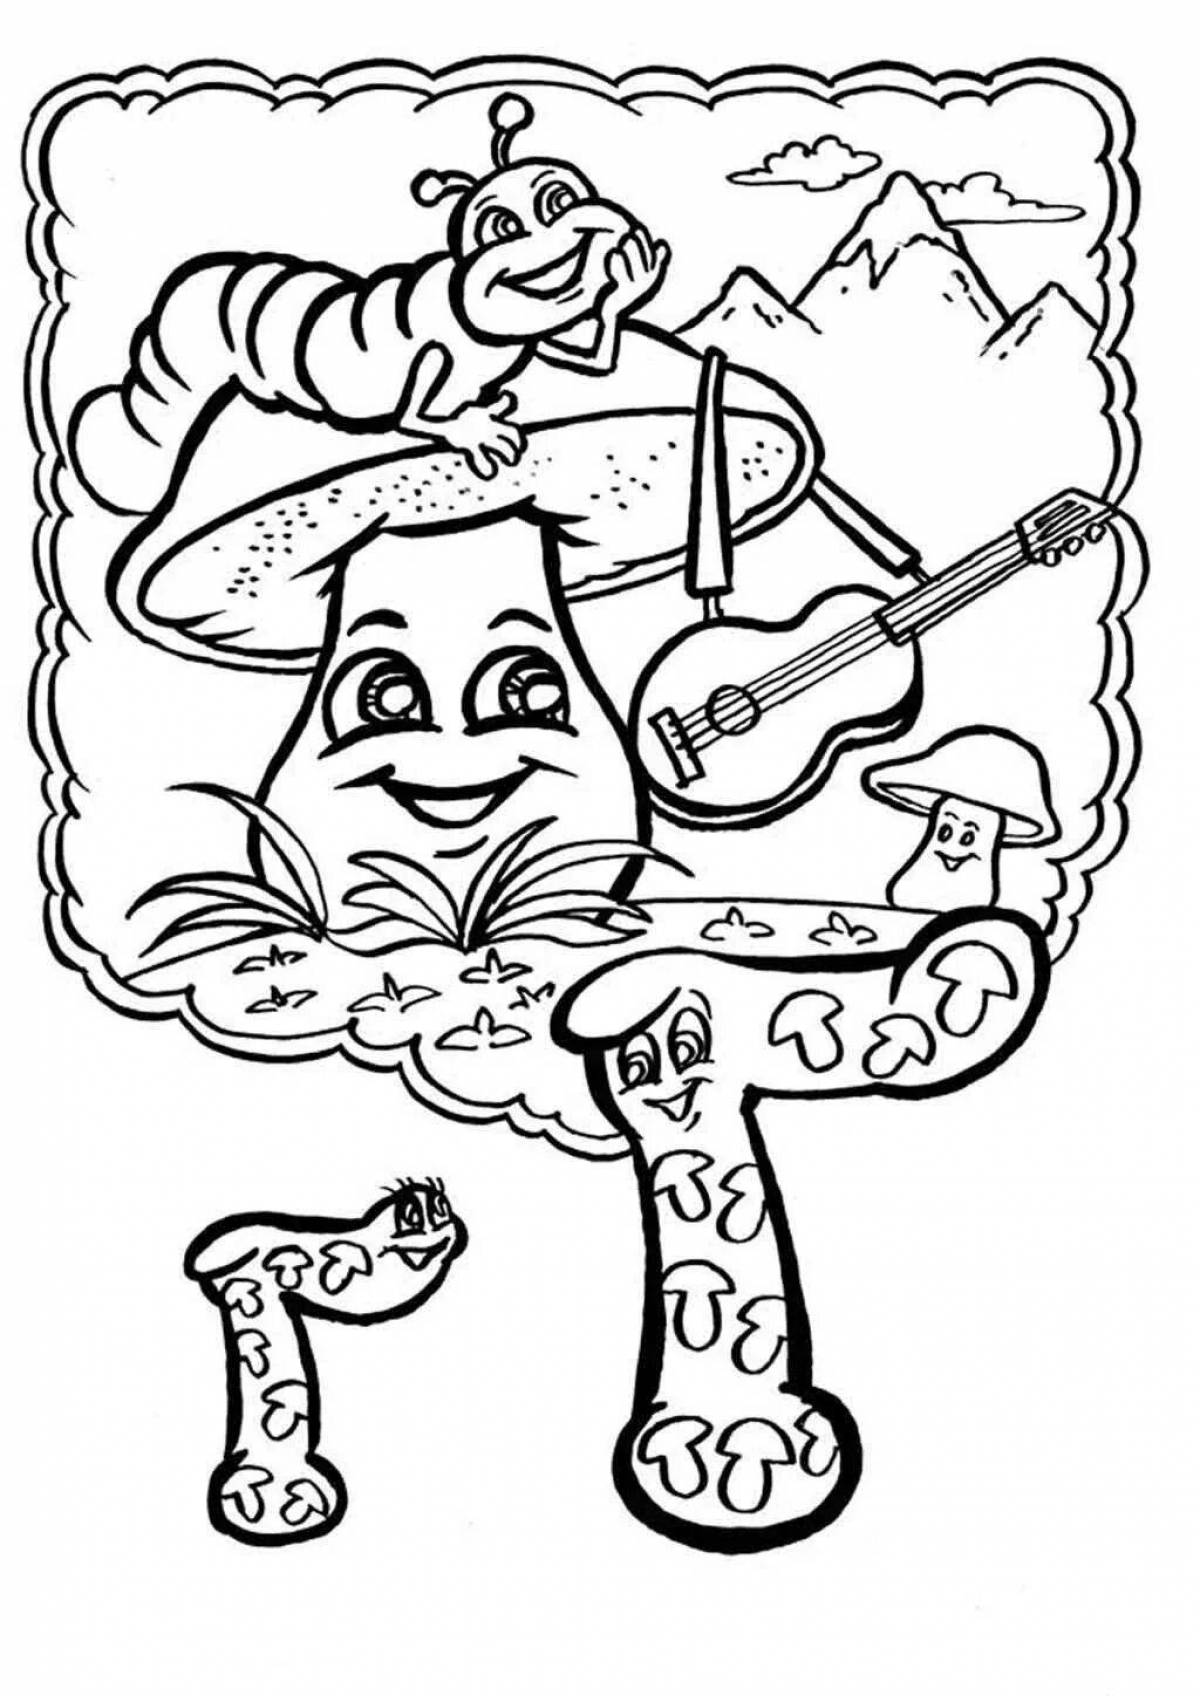 Great letter g coloring pages for kids